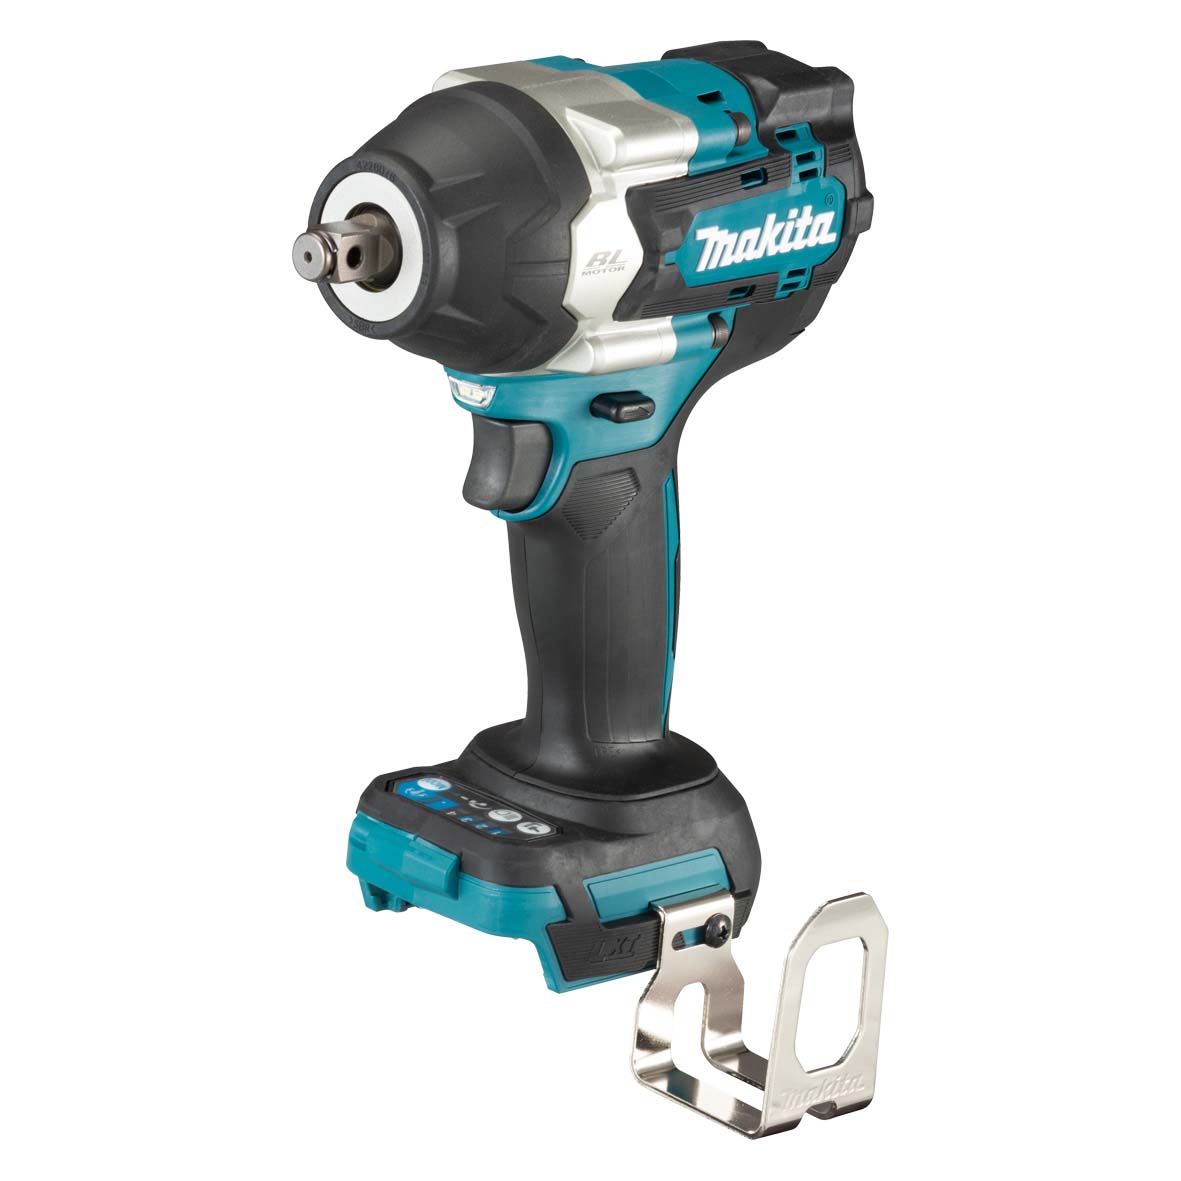 18V 1/2" Brushless Impact Wrench Bare (Tool Only) DTW700Z by Makita